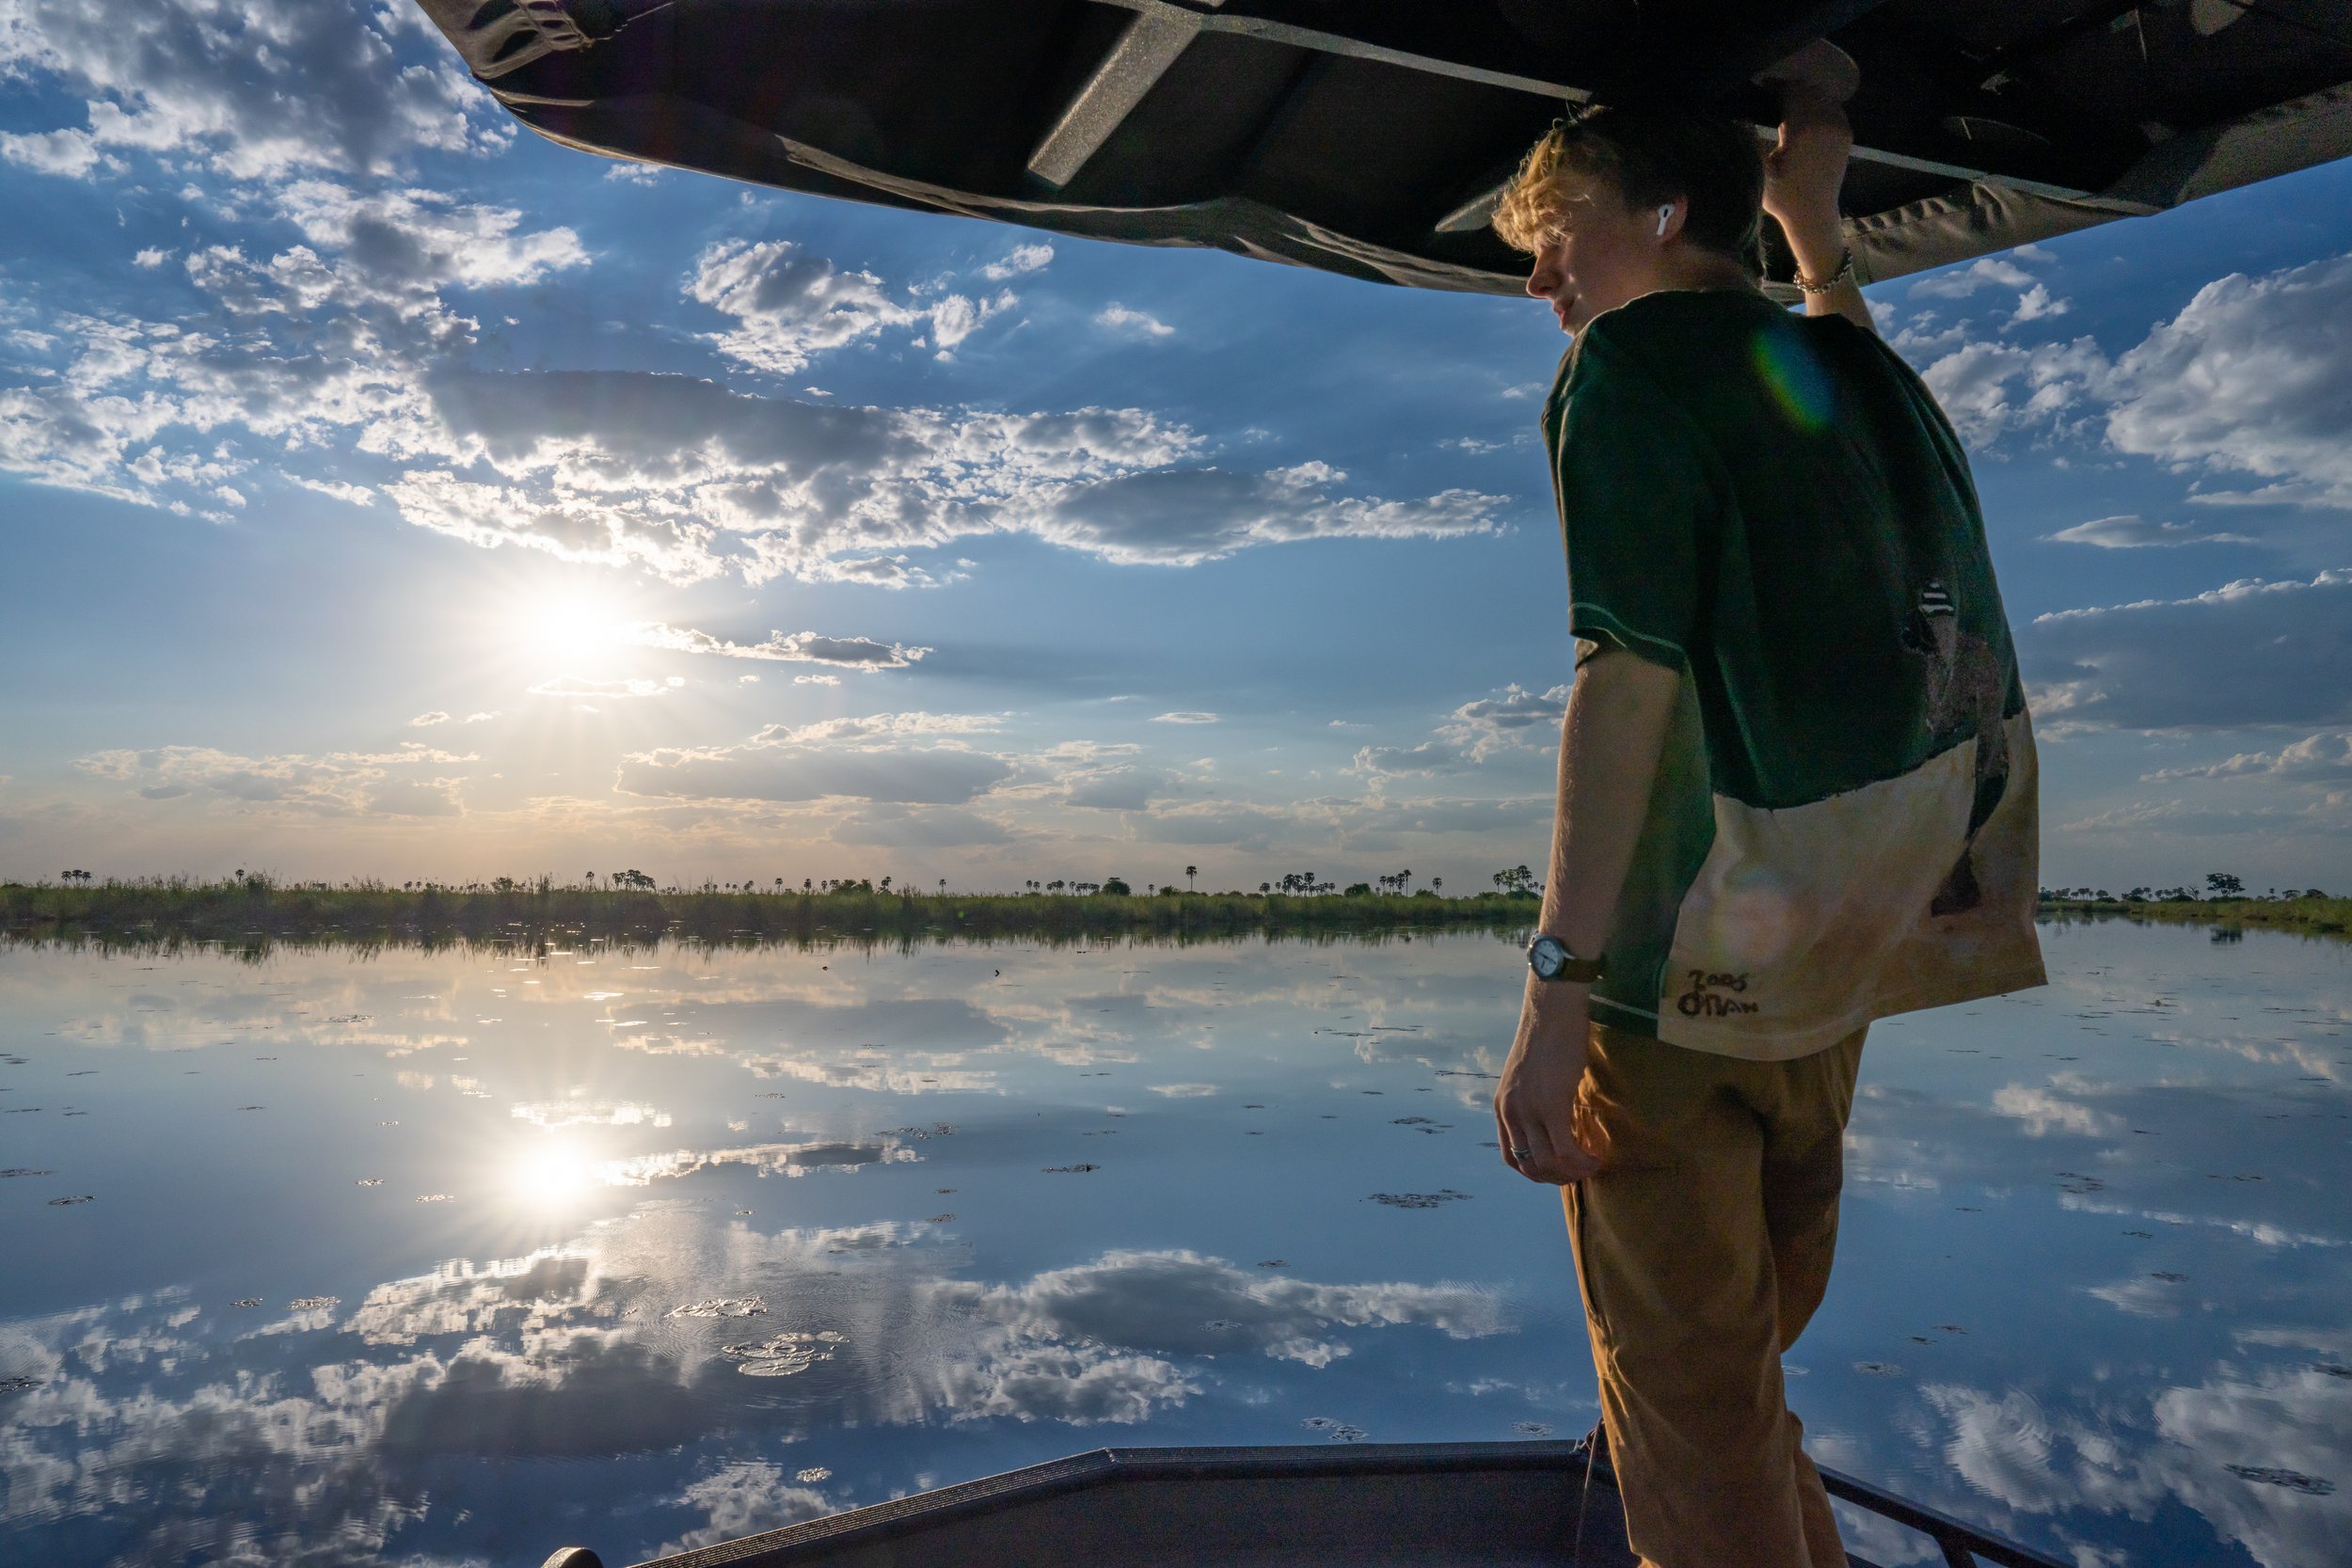   Botswana, 2021  -  Returning to camp one evening on a boat safari through the Savuti Channel of the Linyanti River in Northern Botswana.  